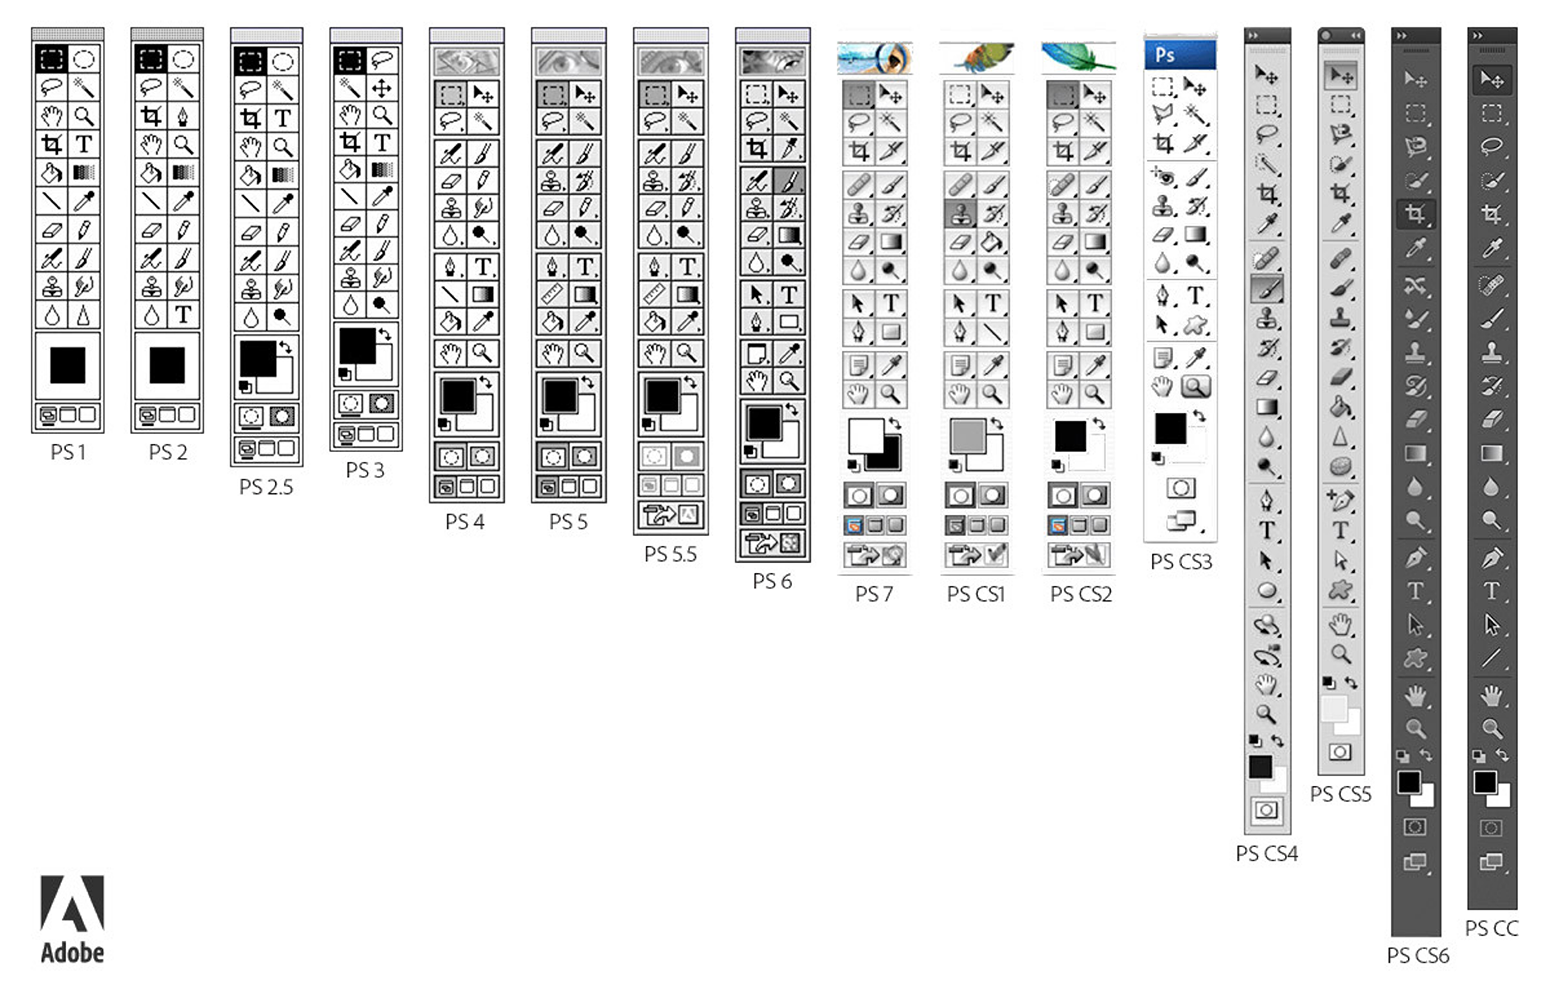 Adobe Photoshop interface menus over the years